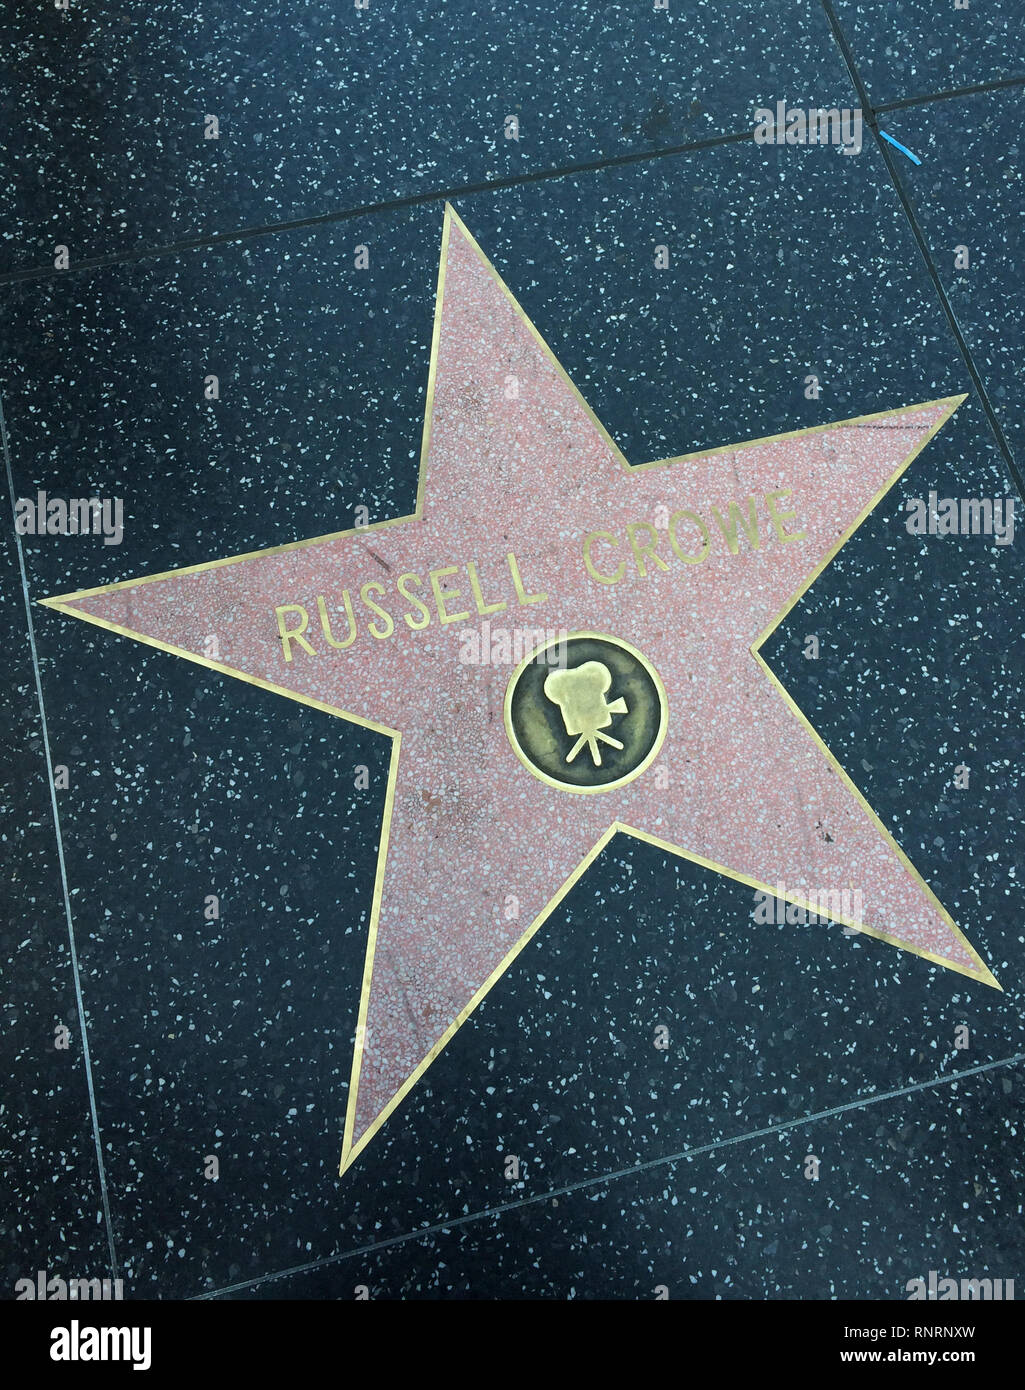 Holywood, Los Angeles, California, USA - June 14, 2014: Star of Russell Crowe on the Walk of Fame Stock Photo